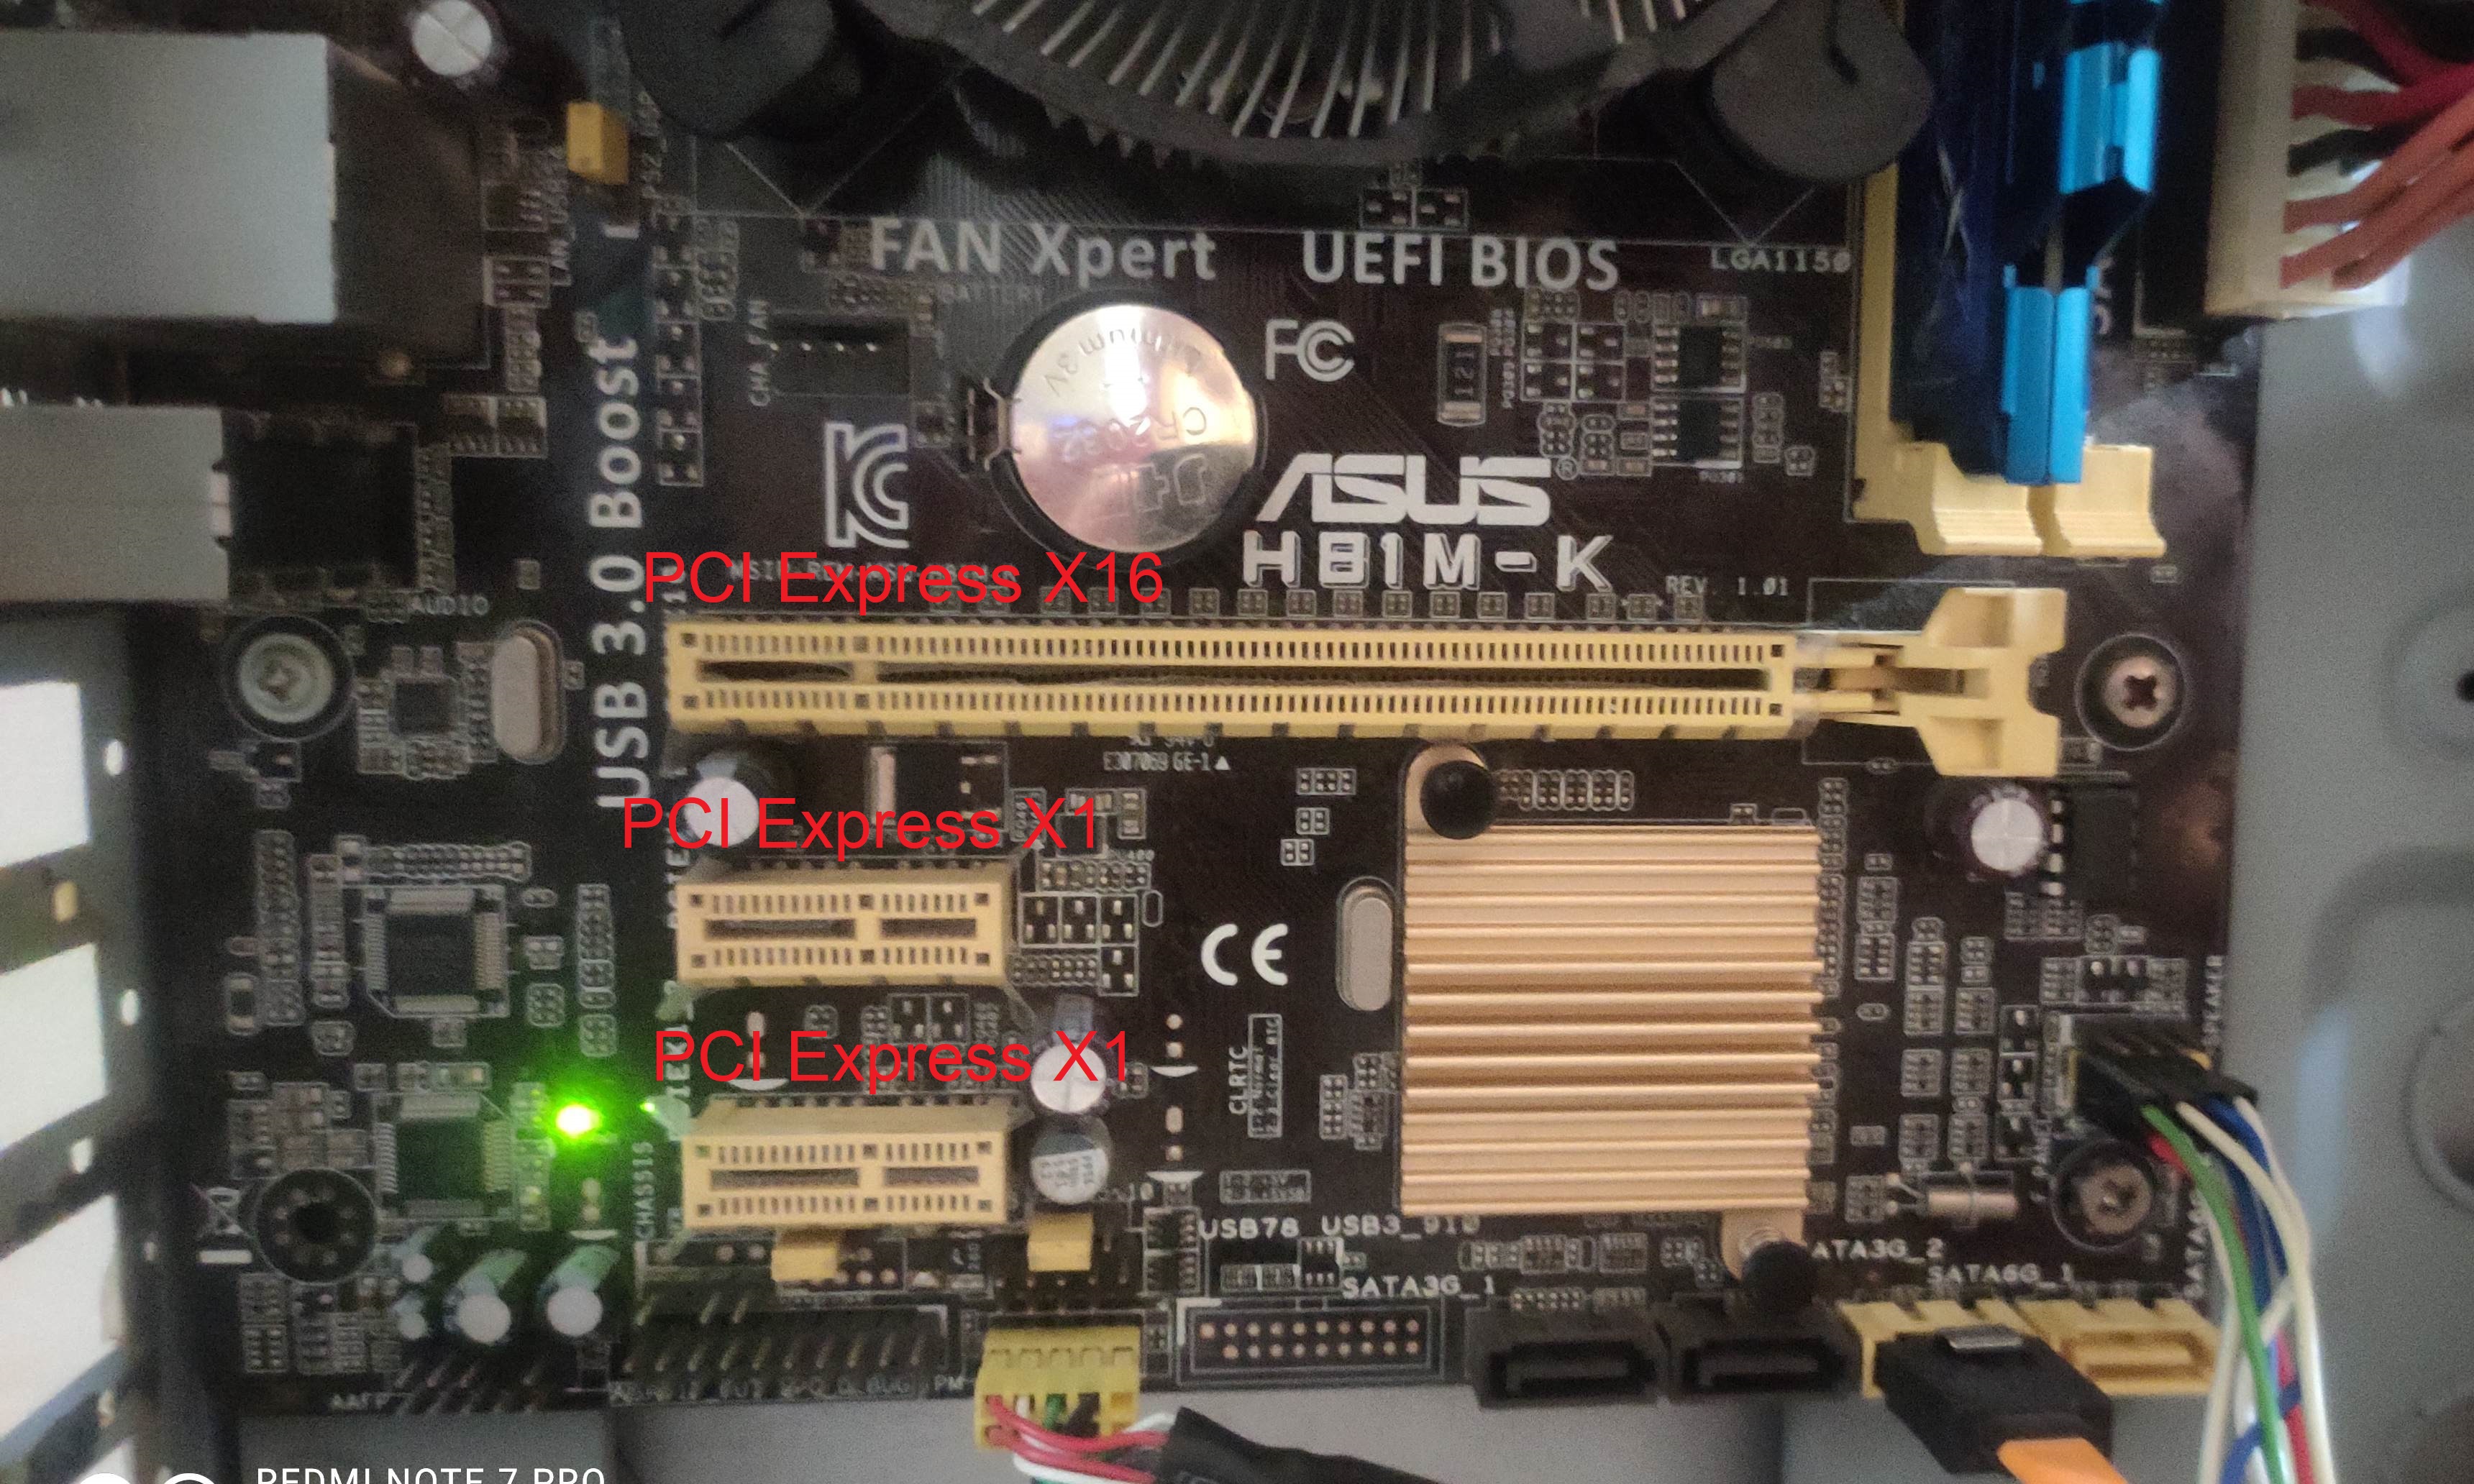 Graphics card securely installed in a motherboard slot